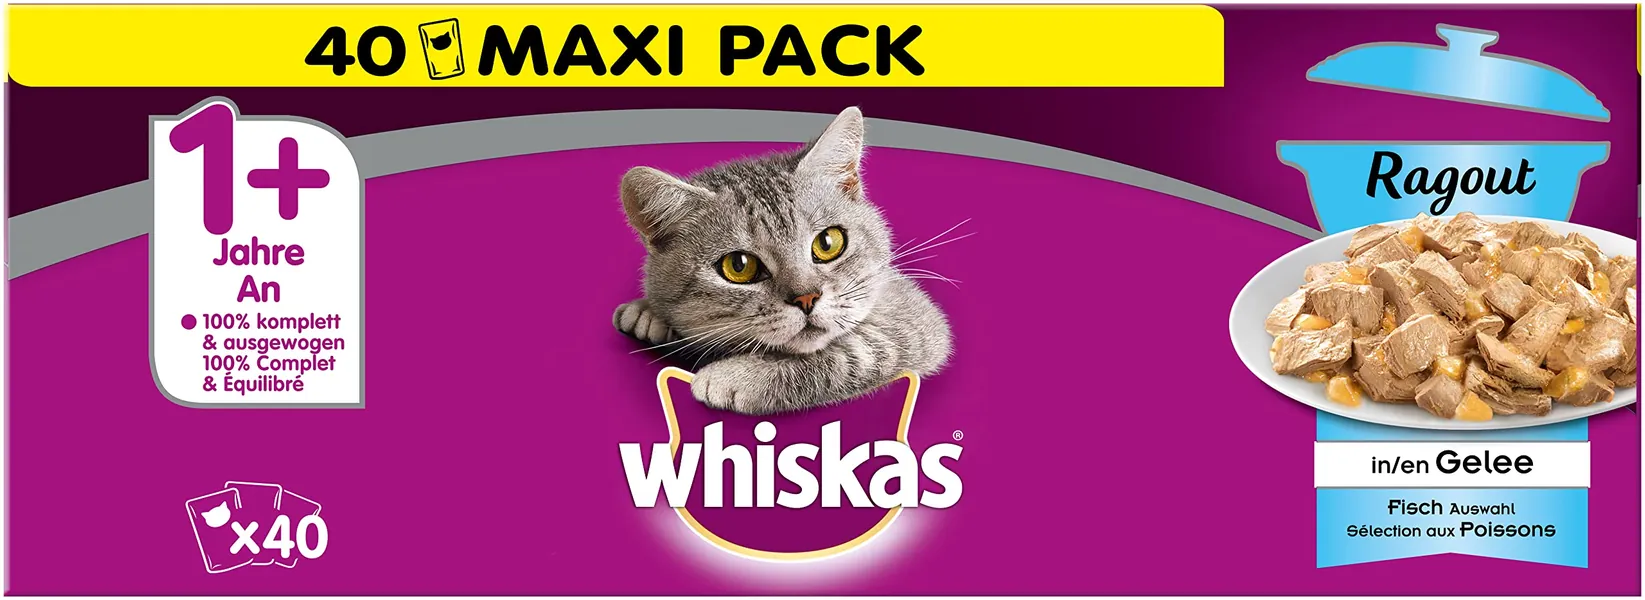 Whiskas Ragout 1+ Cat Food, High Quality Wet Food for Healthy Fur, Wet Food in Different Flavours, fish